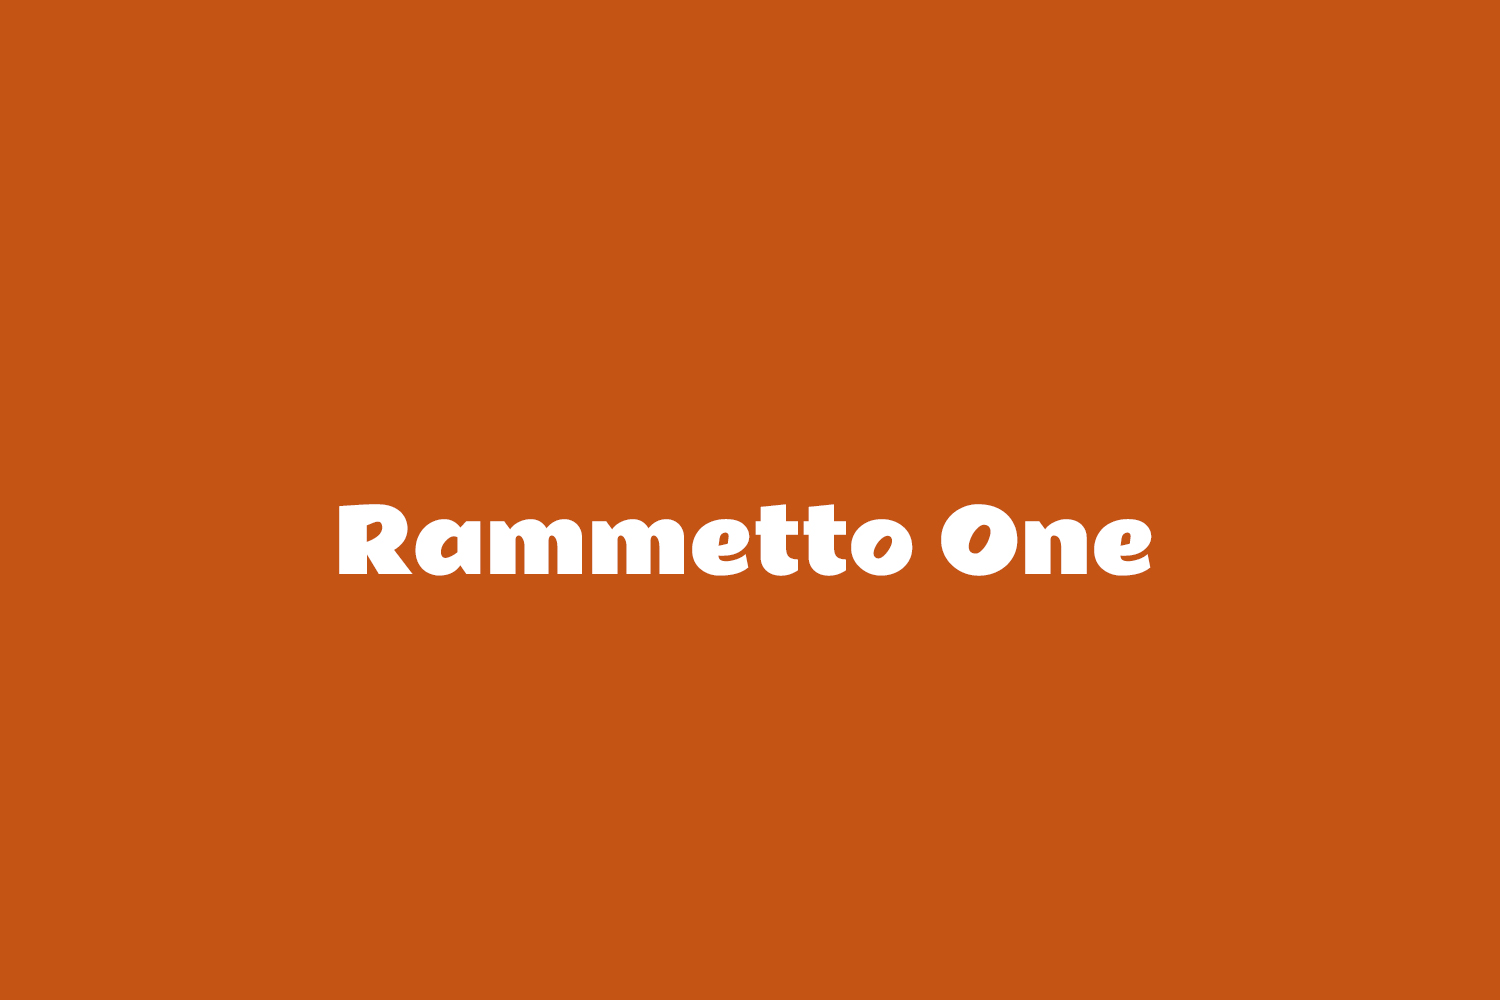 Rammetto One